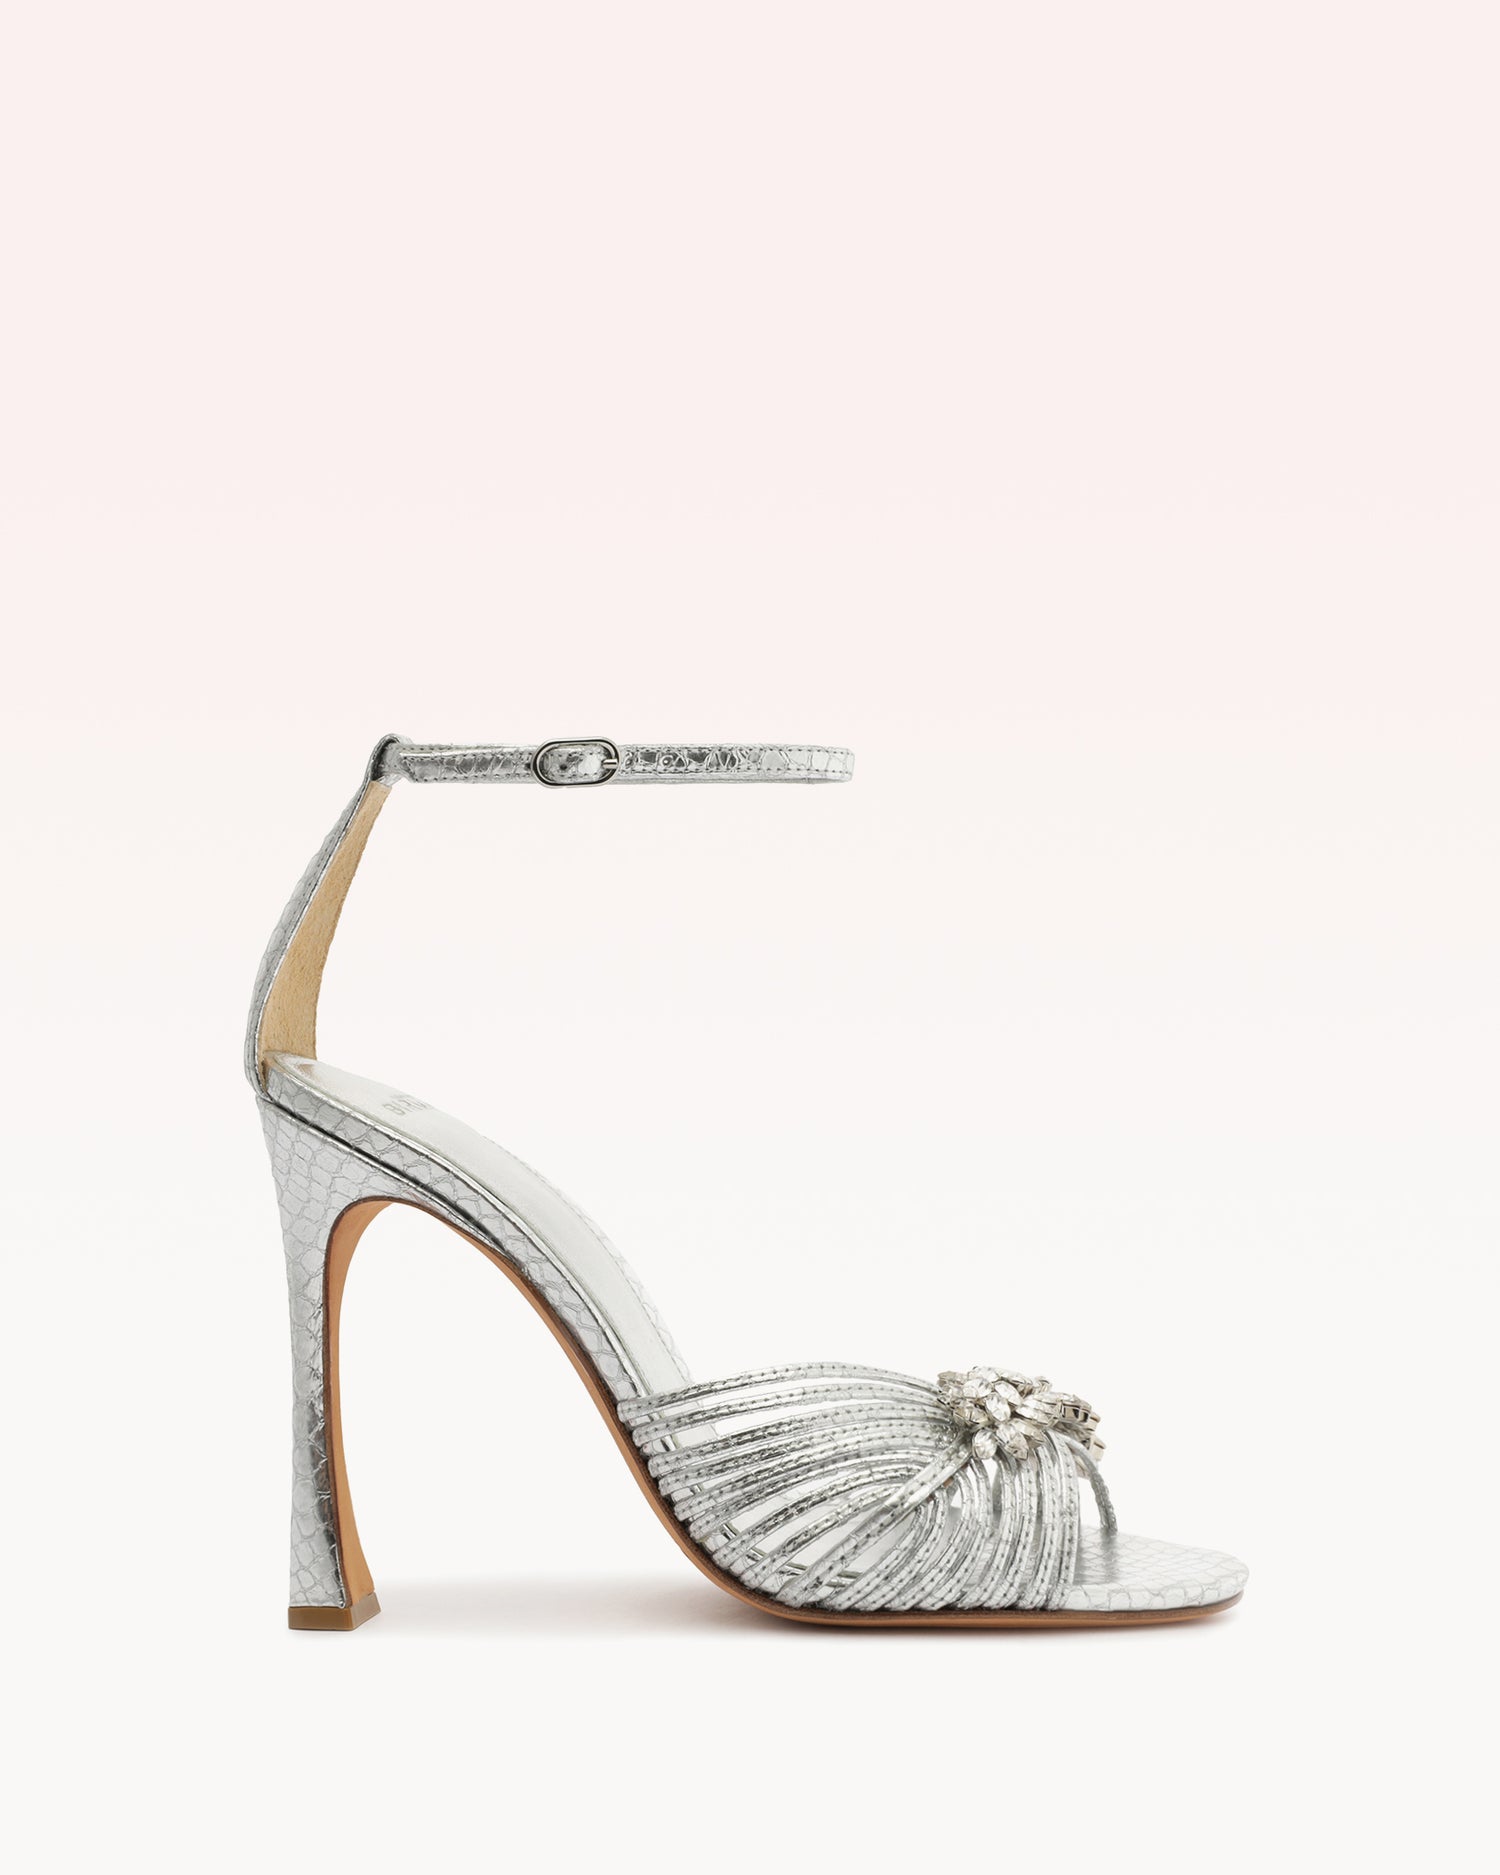 Lisa Crystal 100 Silver Sandals PRE FALL 23 35 Silver Snake Embossed